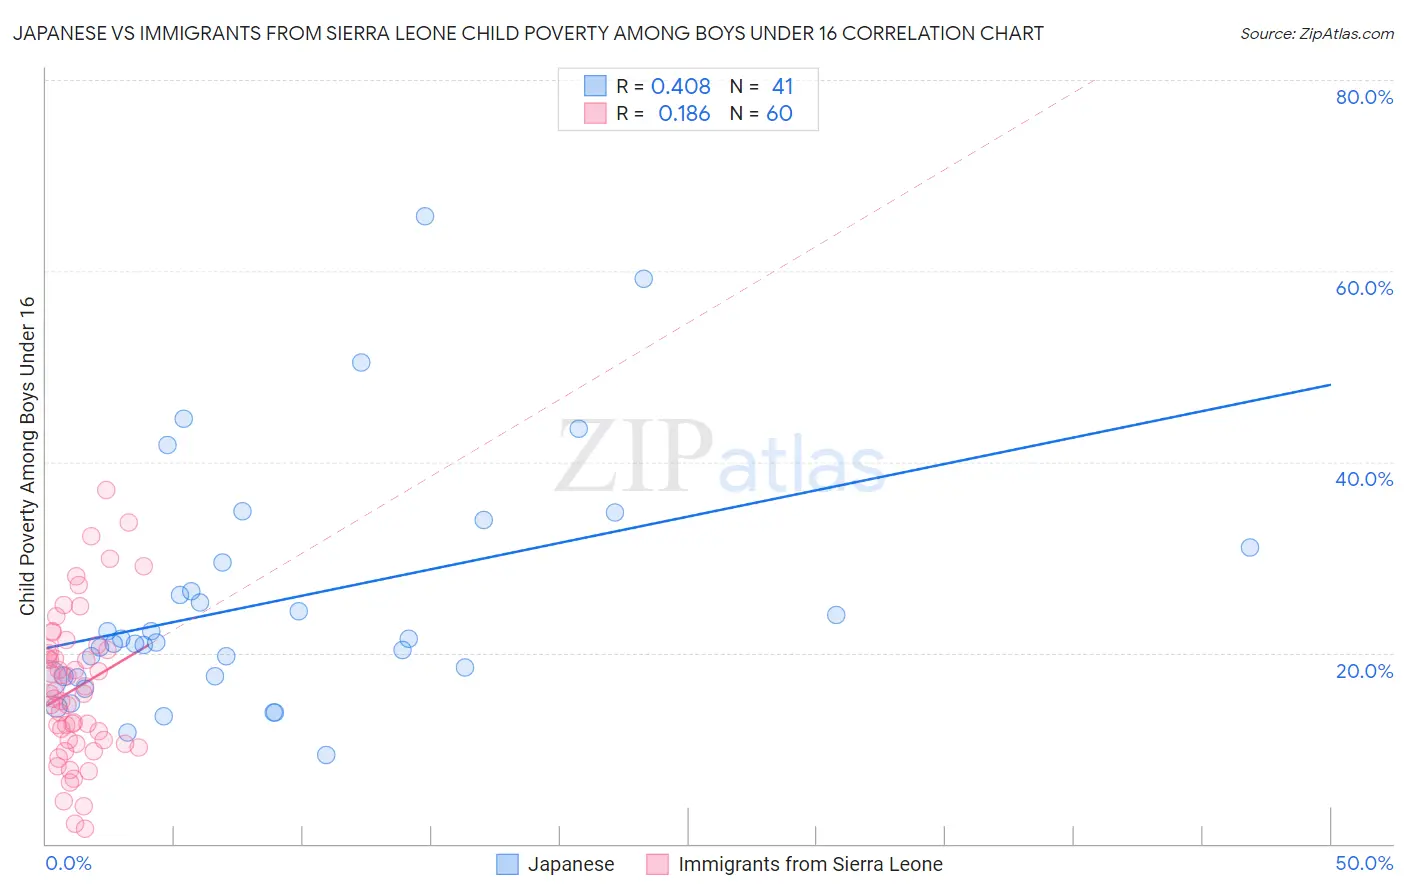 Japanese vs Immigrants from Sierra Leone Child Poverty Among Boys Under 16